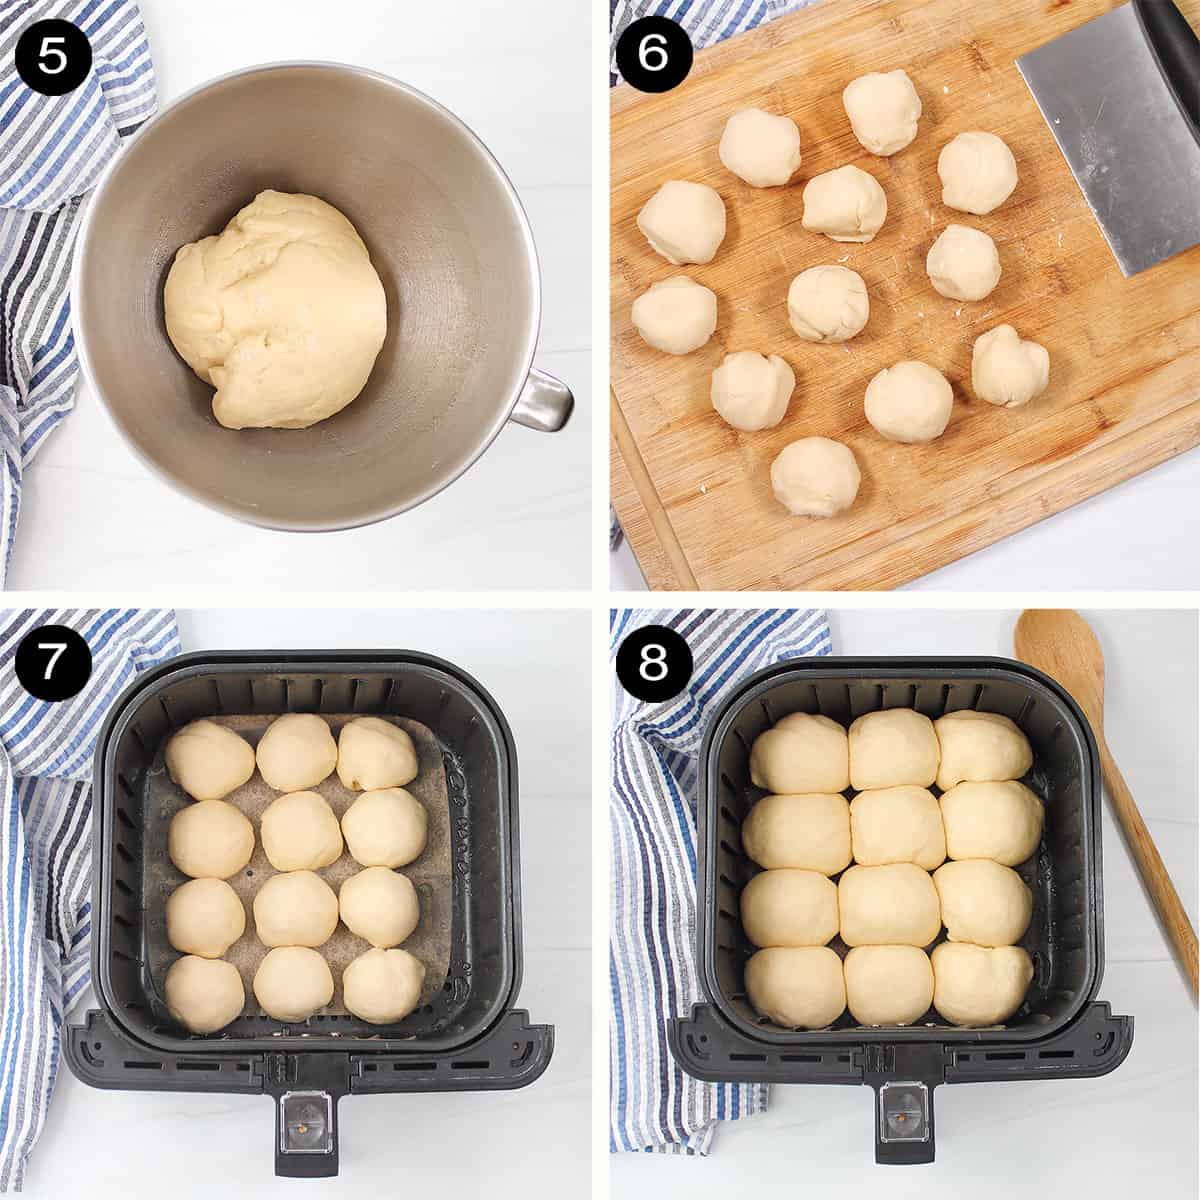 Finishing steps for air fryer yeast rolls.